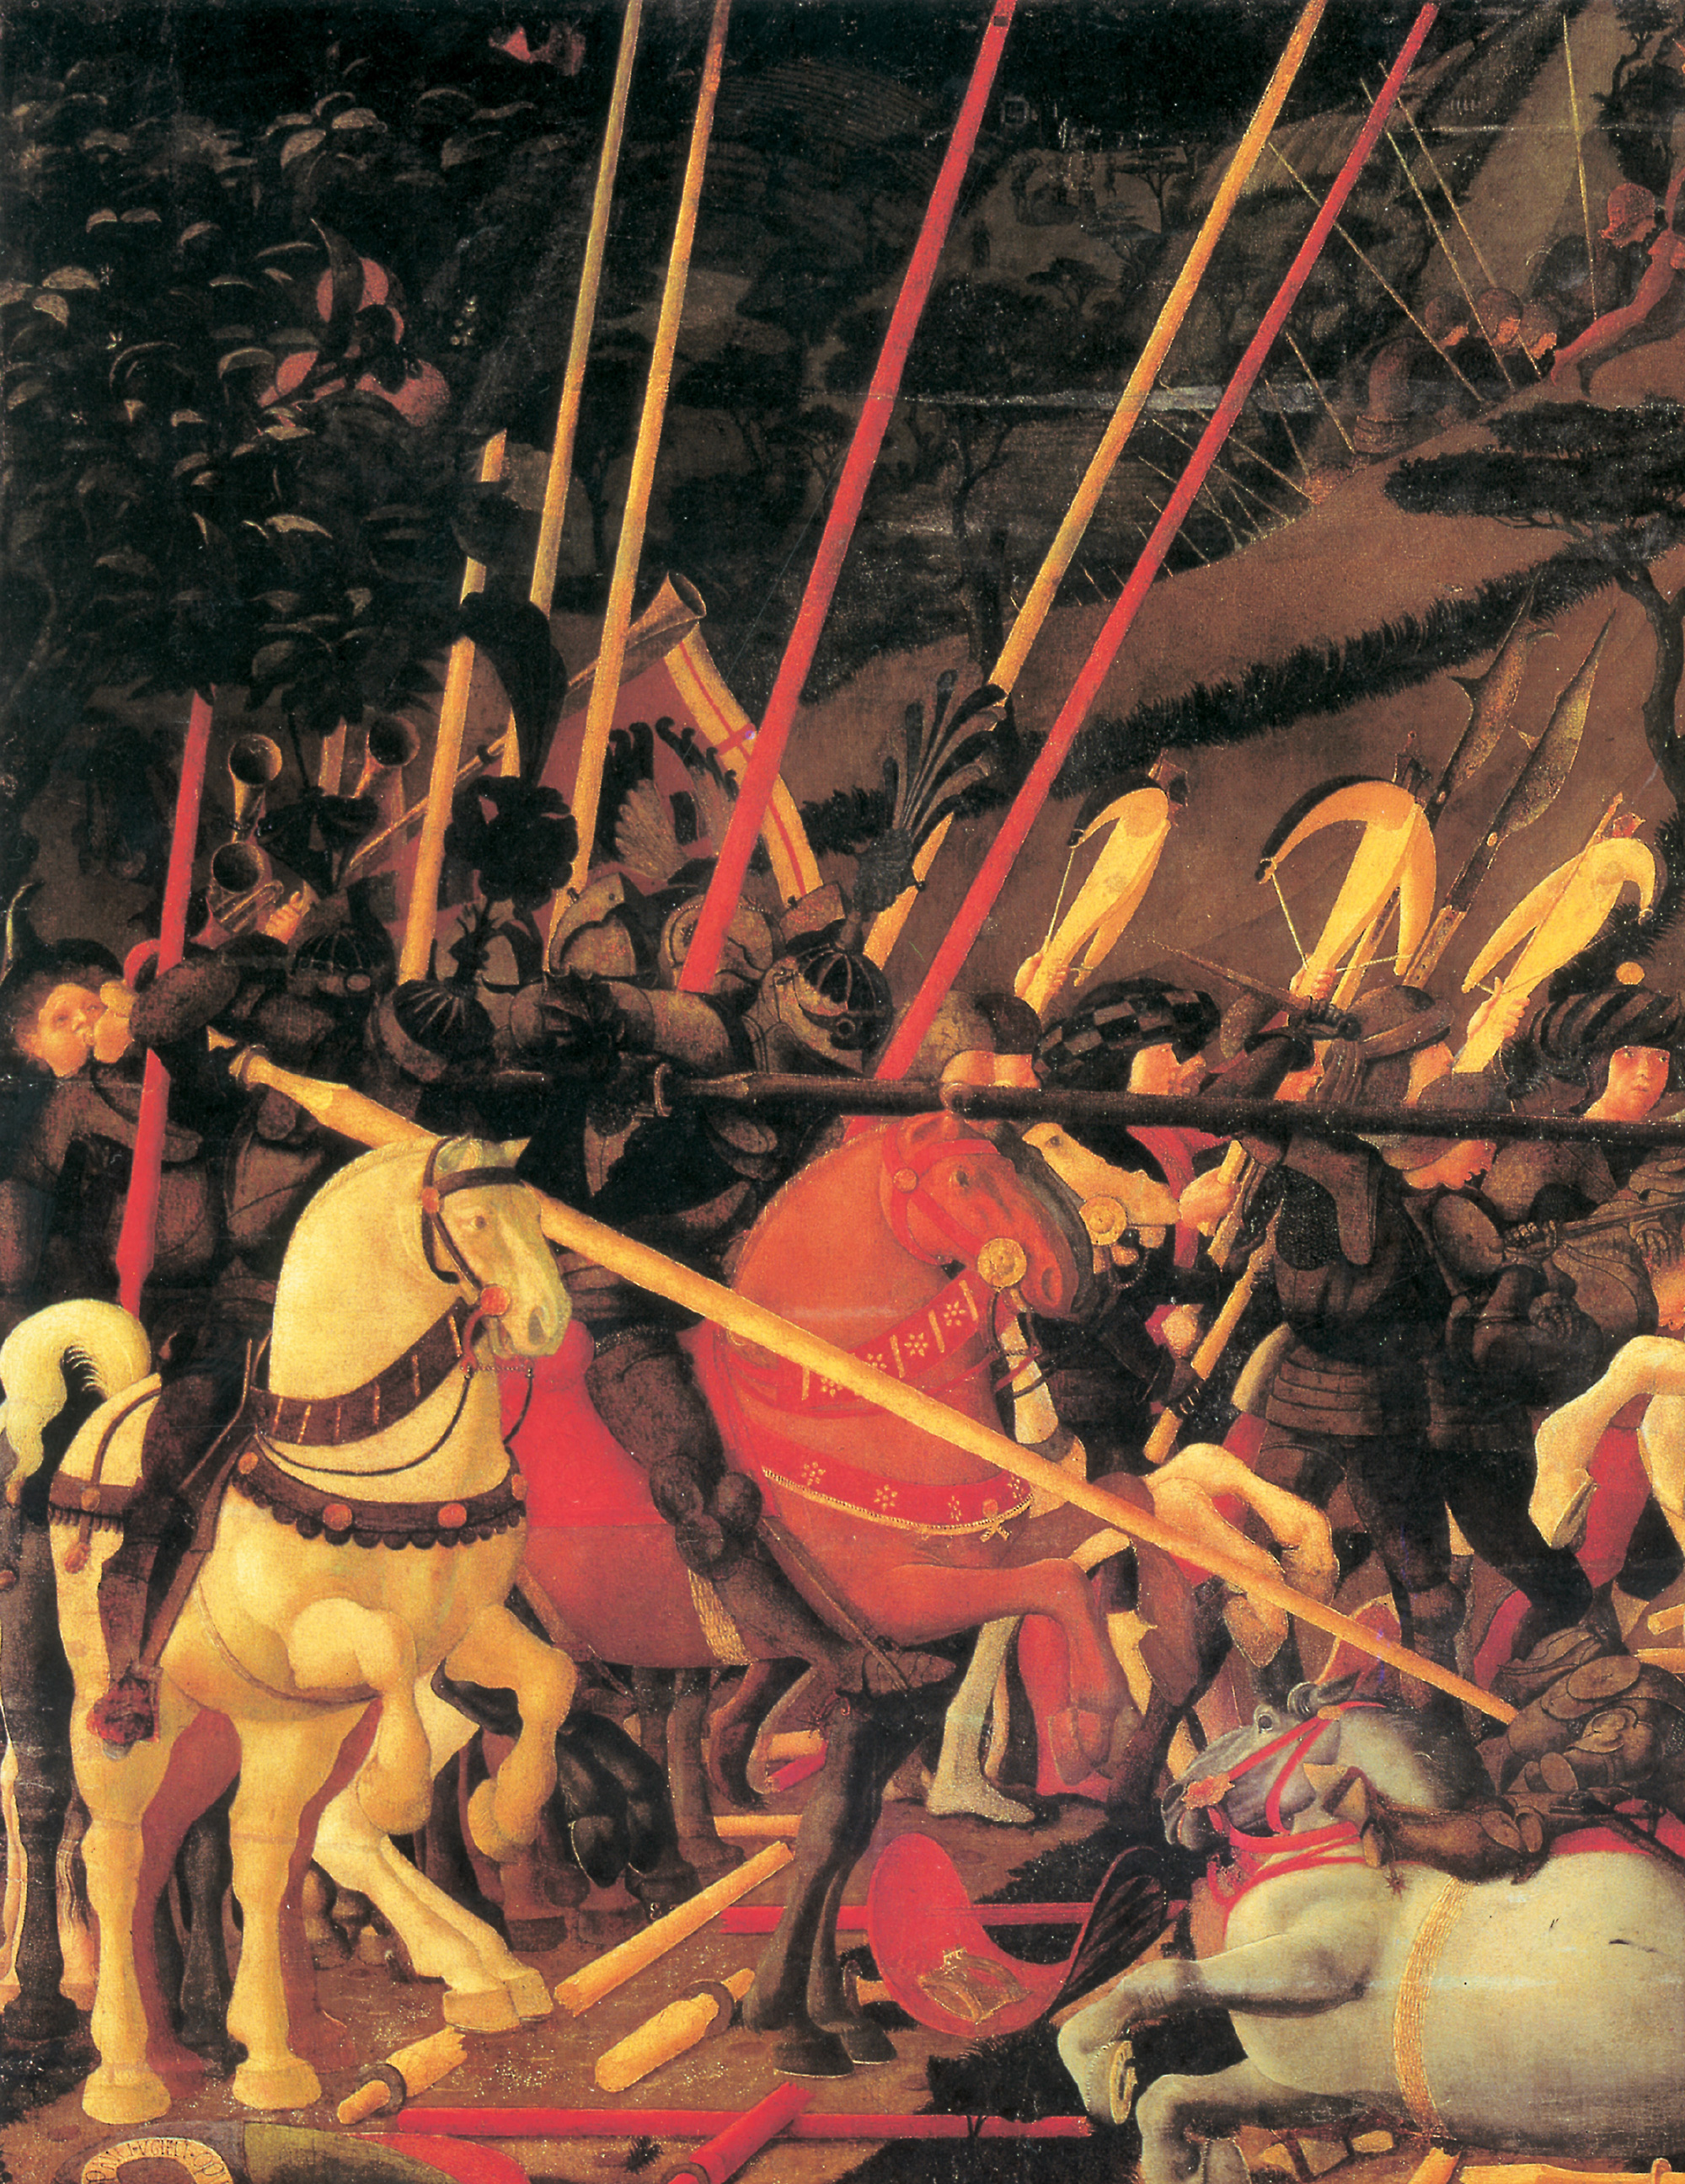 Paolo Uccello, The Battle of San Romano (detail), 1456 Tempera on wood
72" x 127"